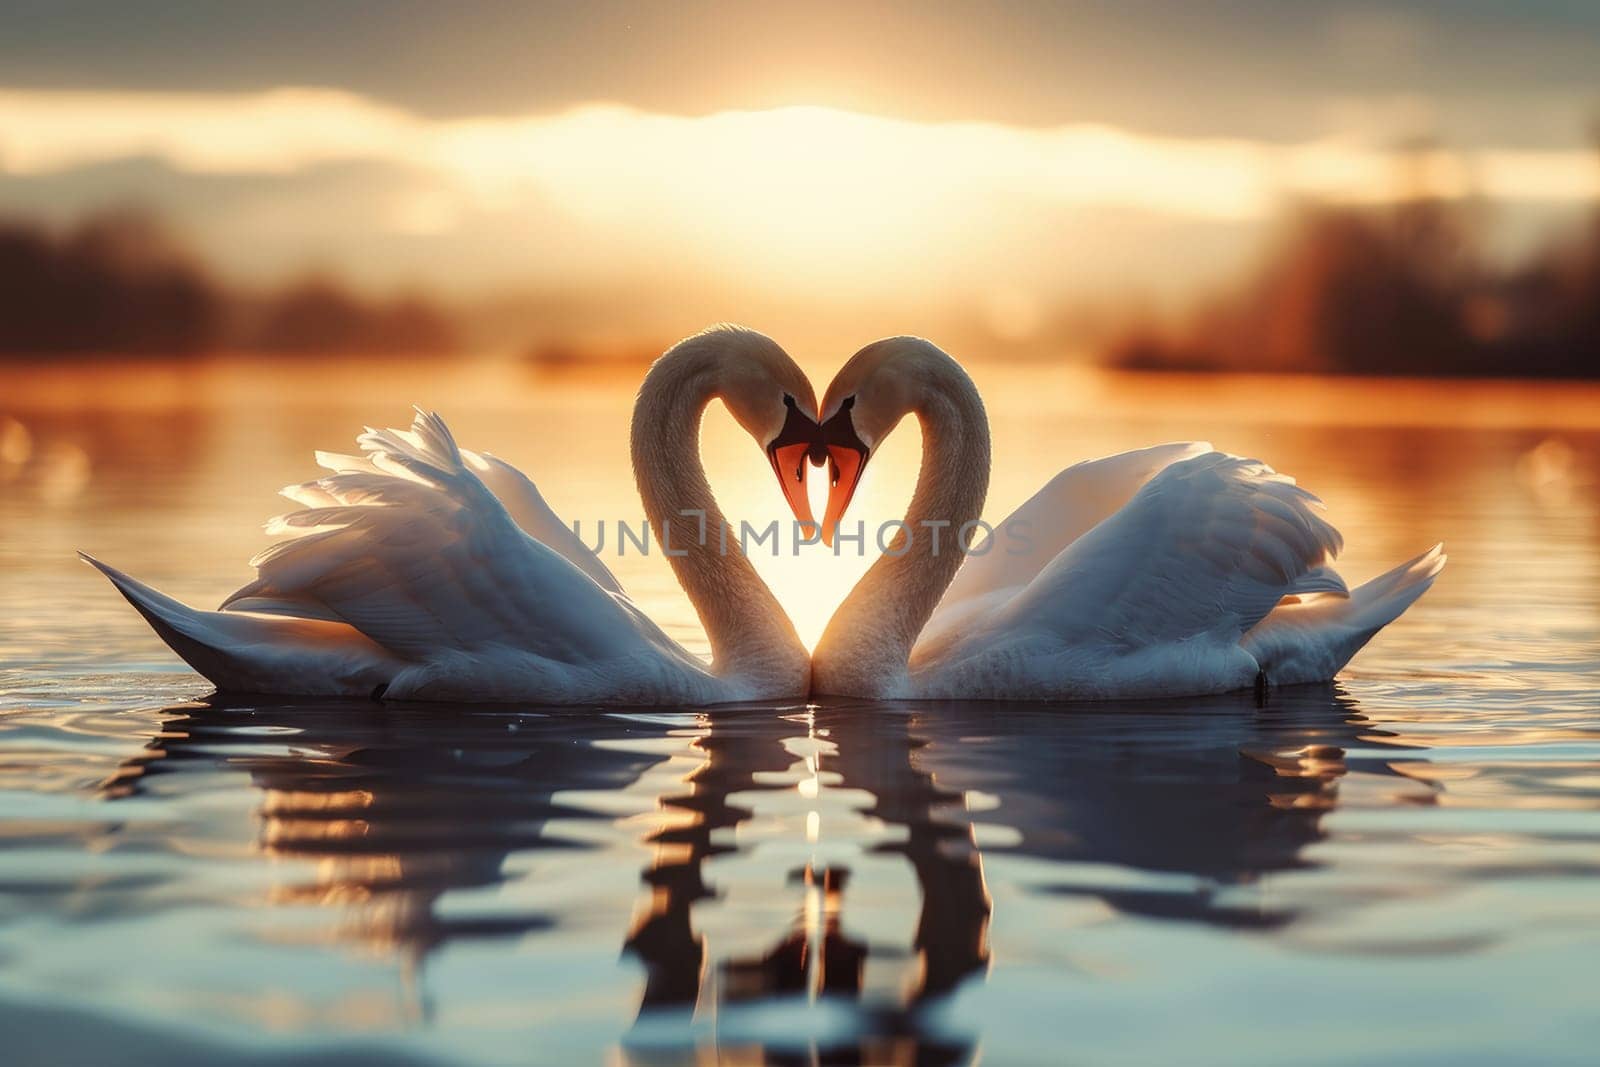 Romantic swans making a heart shape, Swan couple for Valentine's Day.